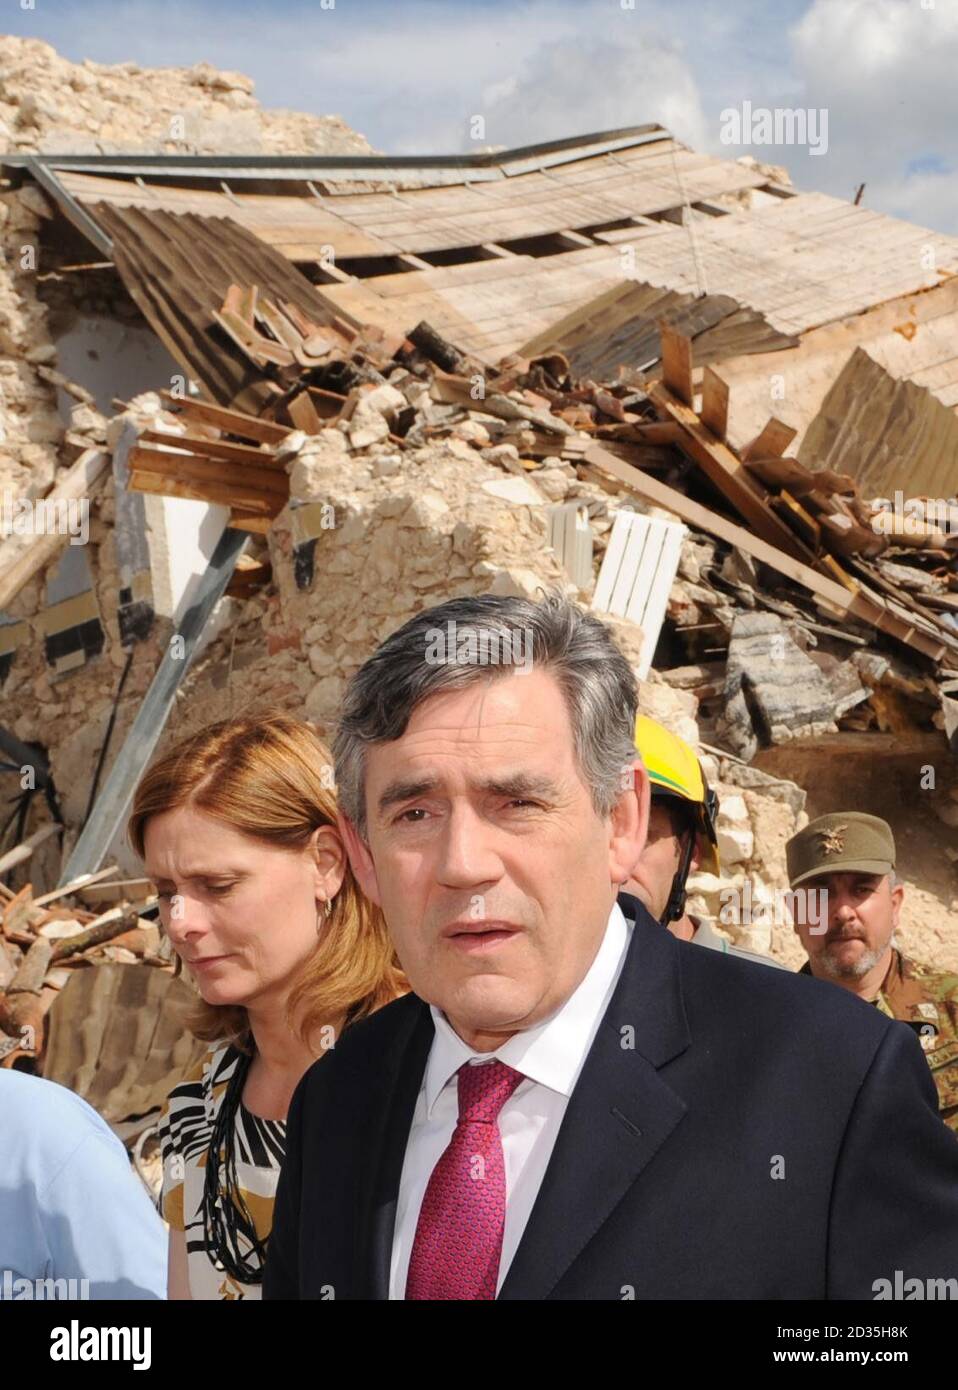 Prime Minister Gordon Brown and his wife, Sarah Brown visit the ruined village of Onna near L'Aquila, Italy which was at the epicentre of the earthquake which struck the region on April 6, 2009. Stock Photo